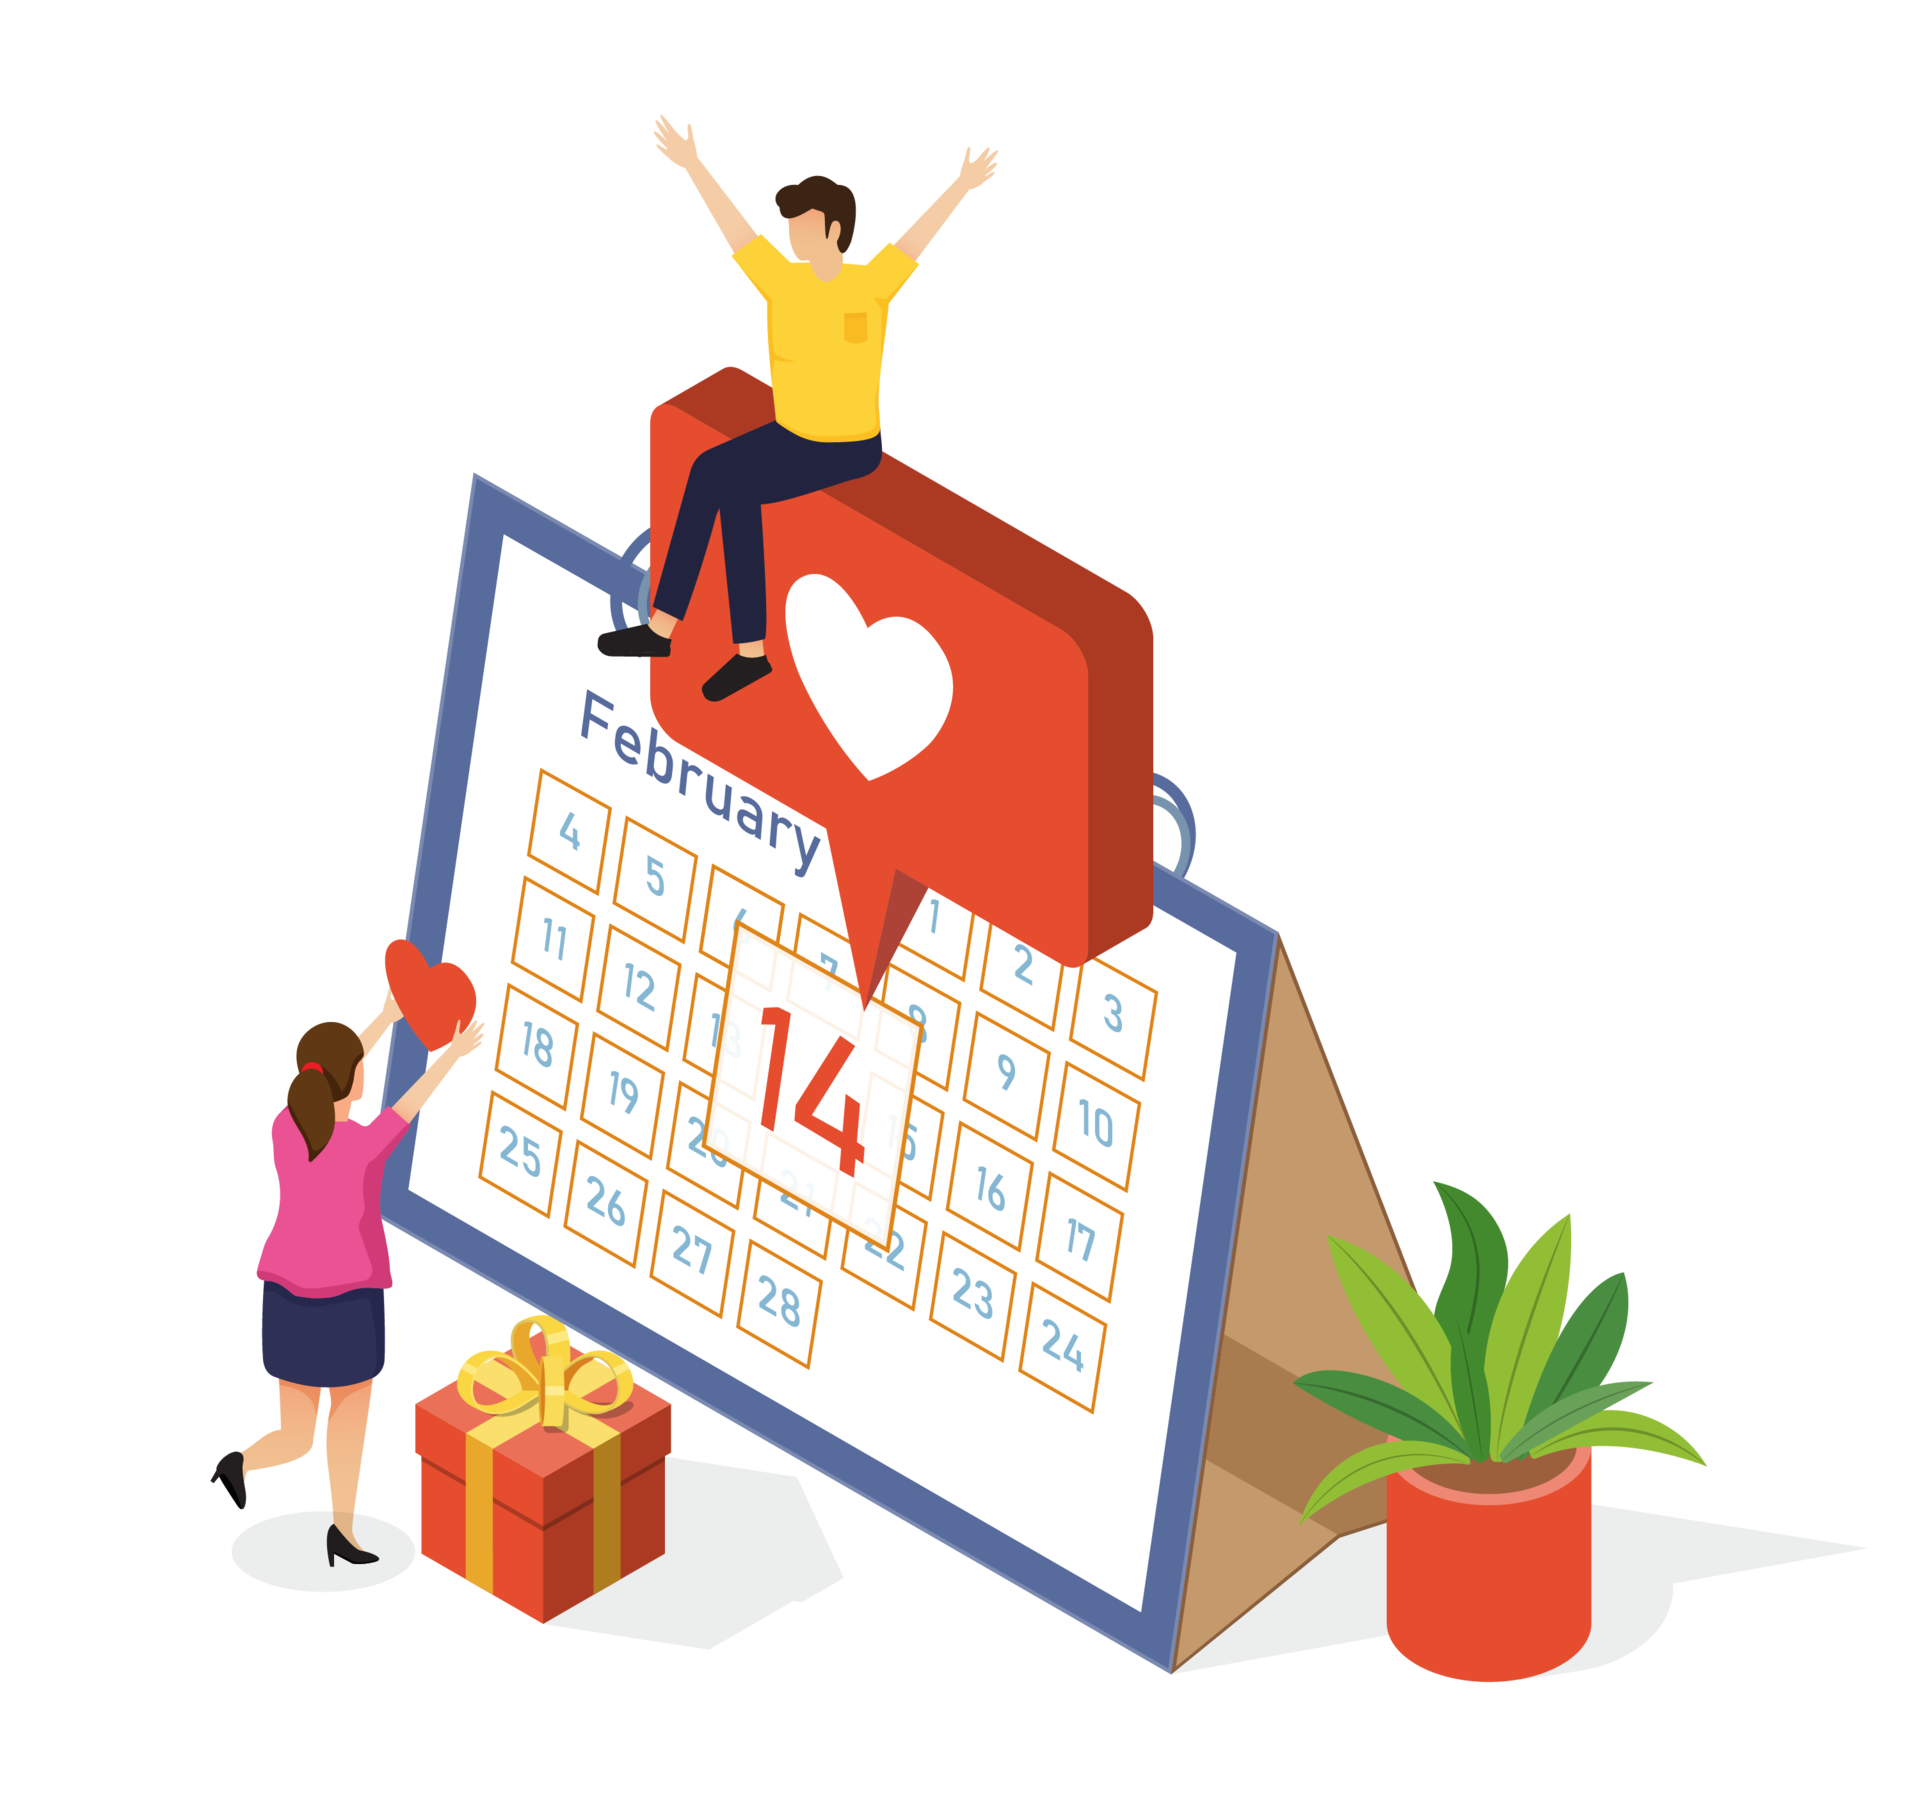 valentines-day-calendar-sign-isometric-view-concept-25218145-png